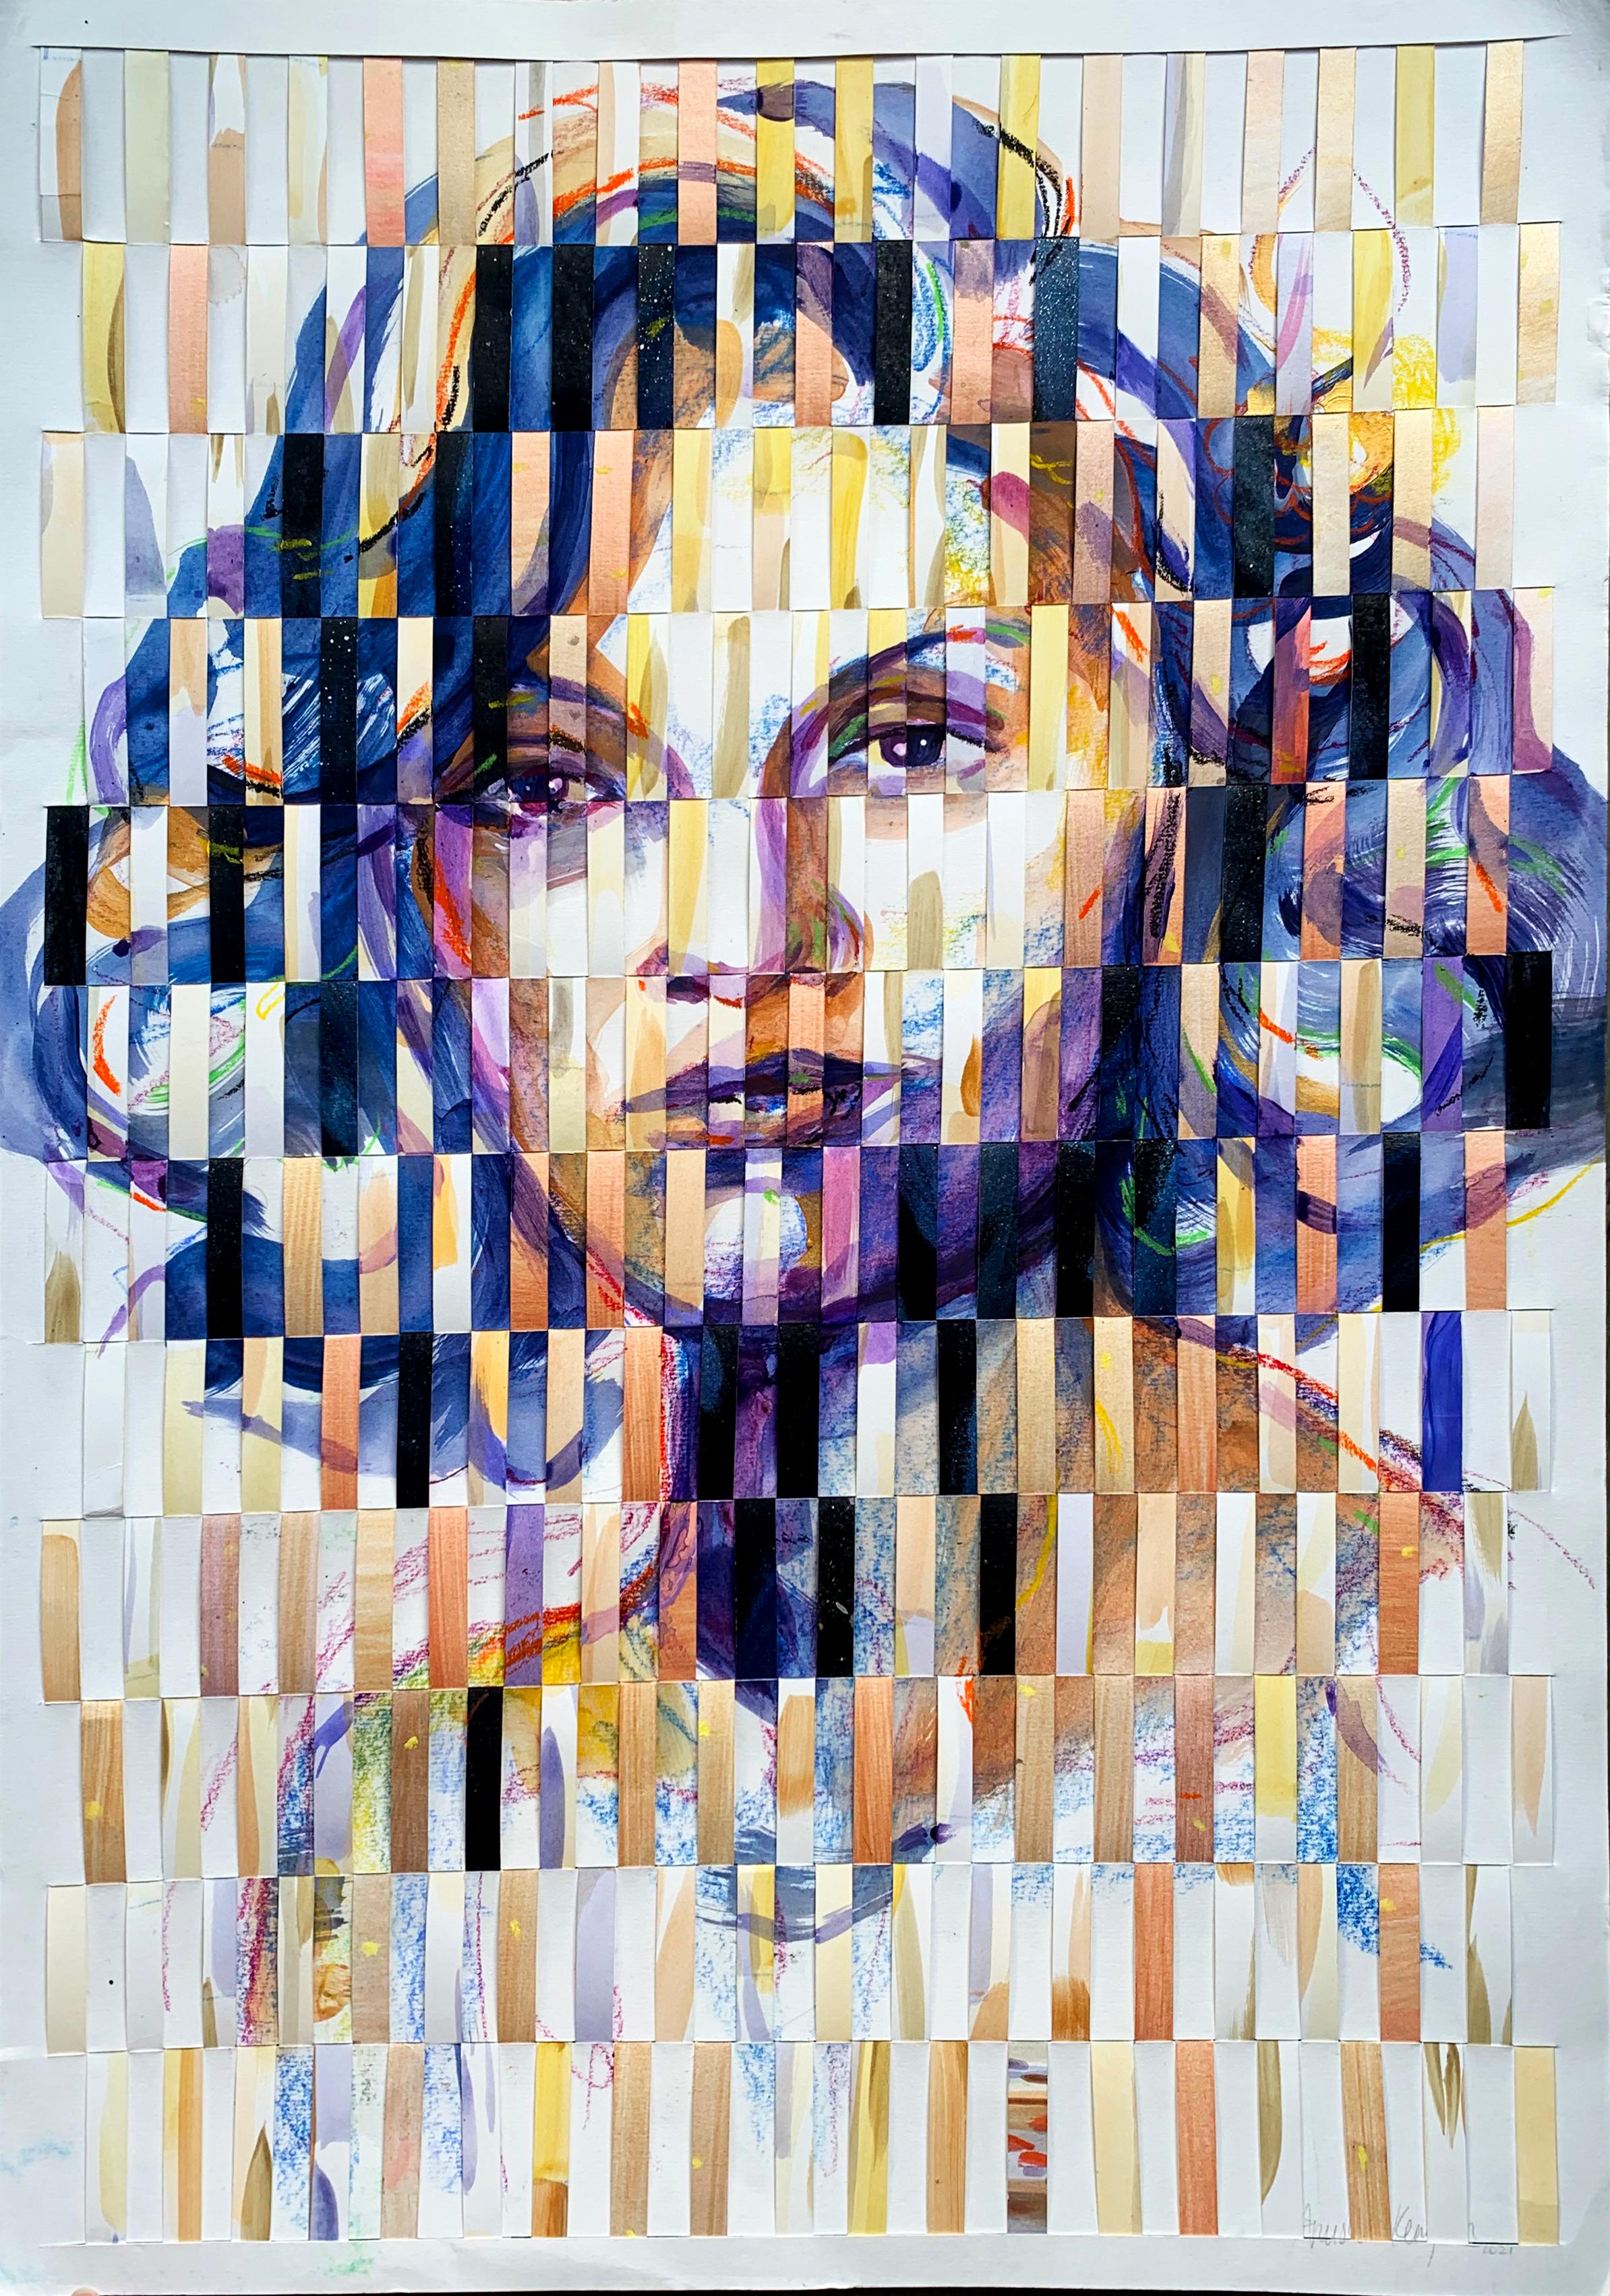 Mixed Media on Woven Fabriano Portrait Painting "Lady in Blue"